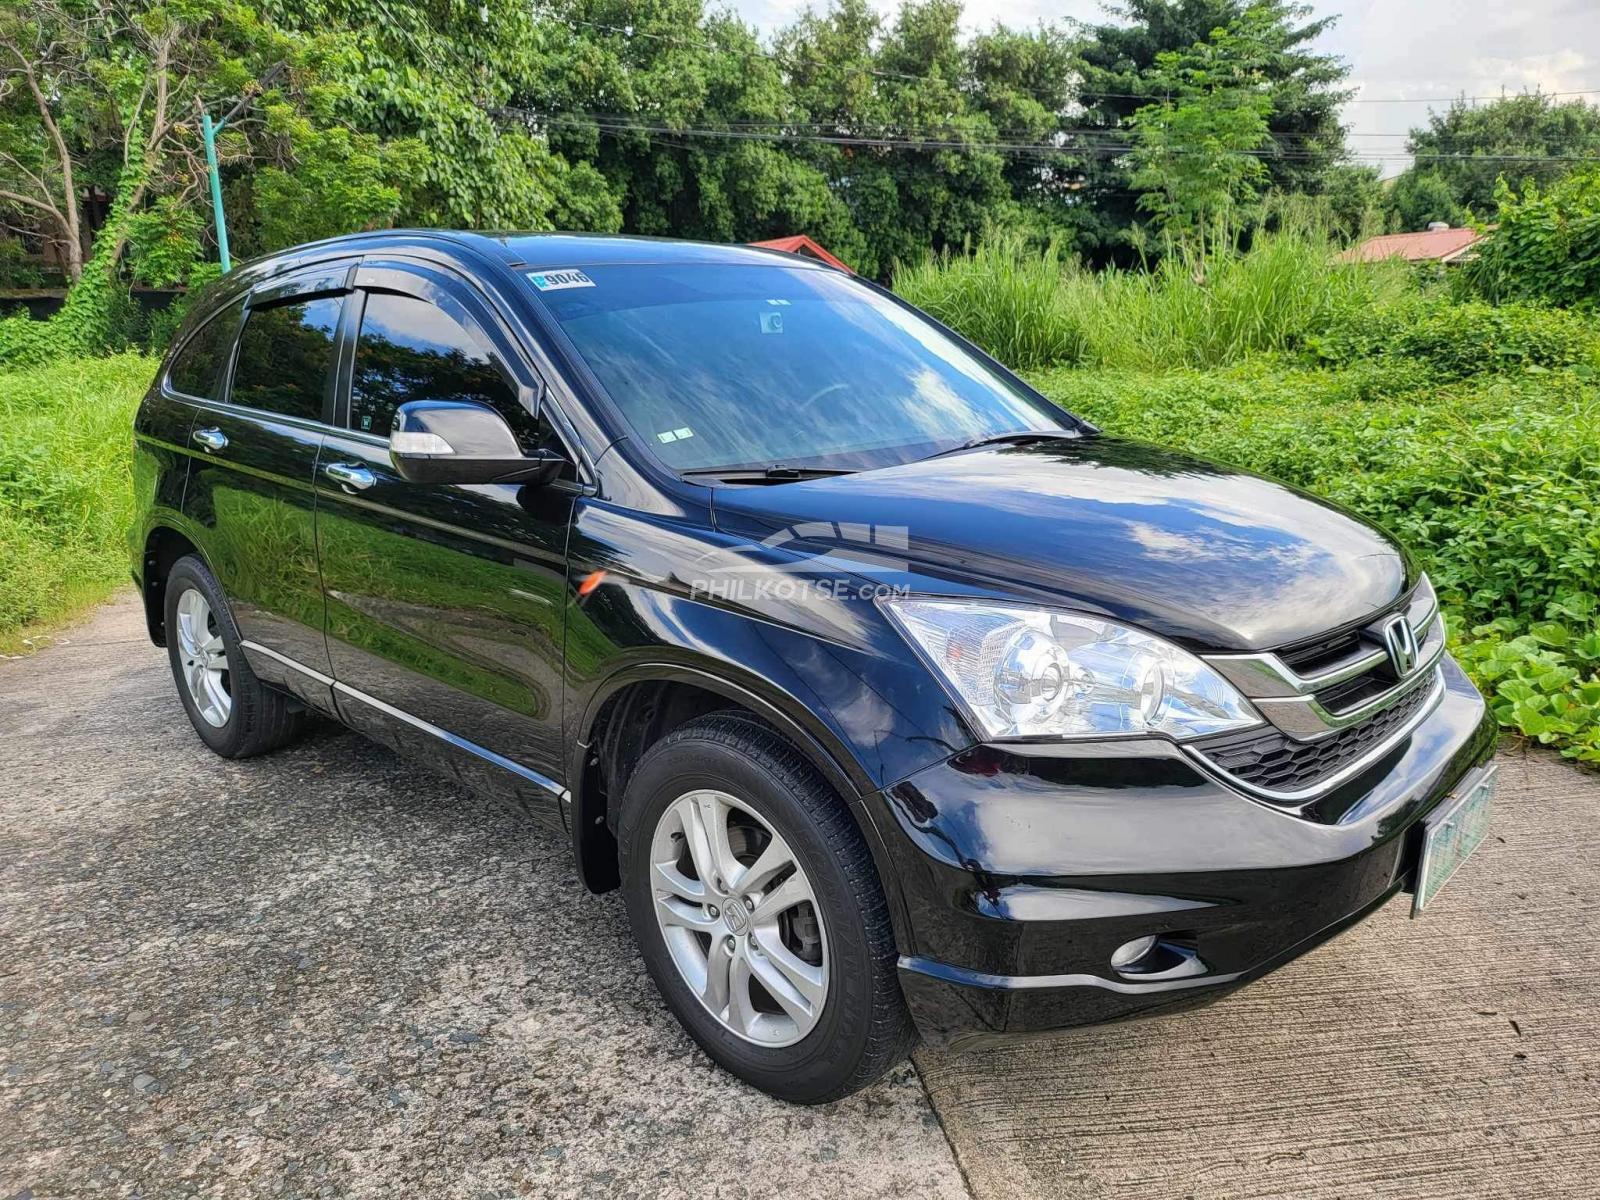 Buy Used Honda Cr V 2011 For Sale Only ₱458000 Id831772